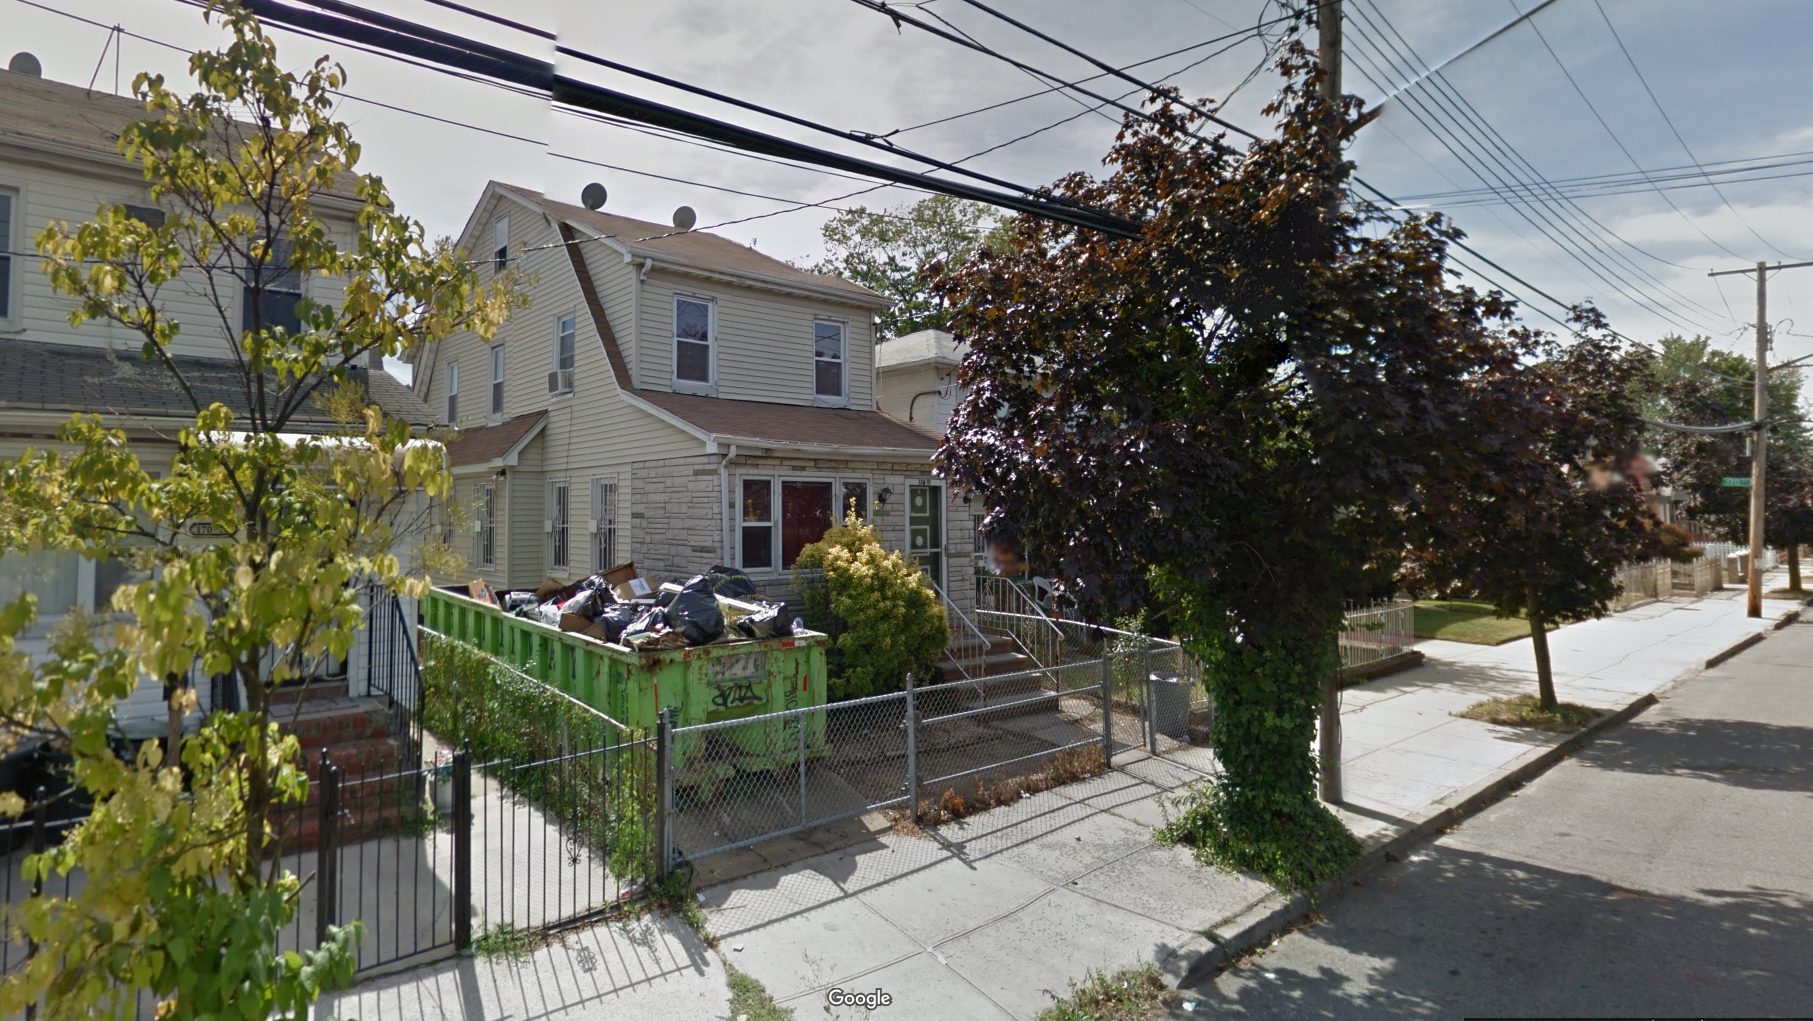 Sheriff's Sale: 170-10 144th Ave, Jamaica